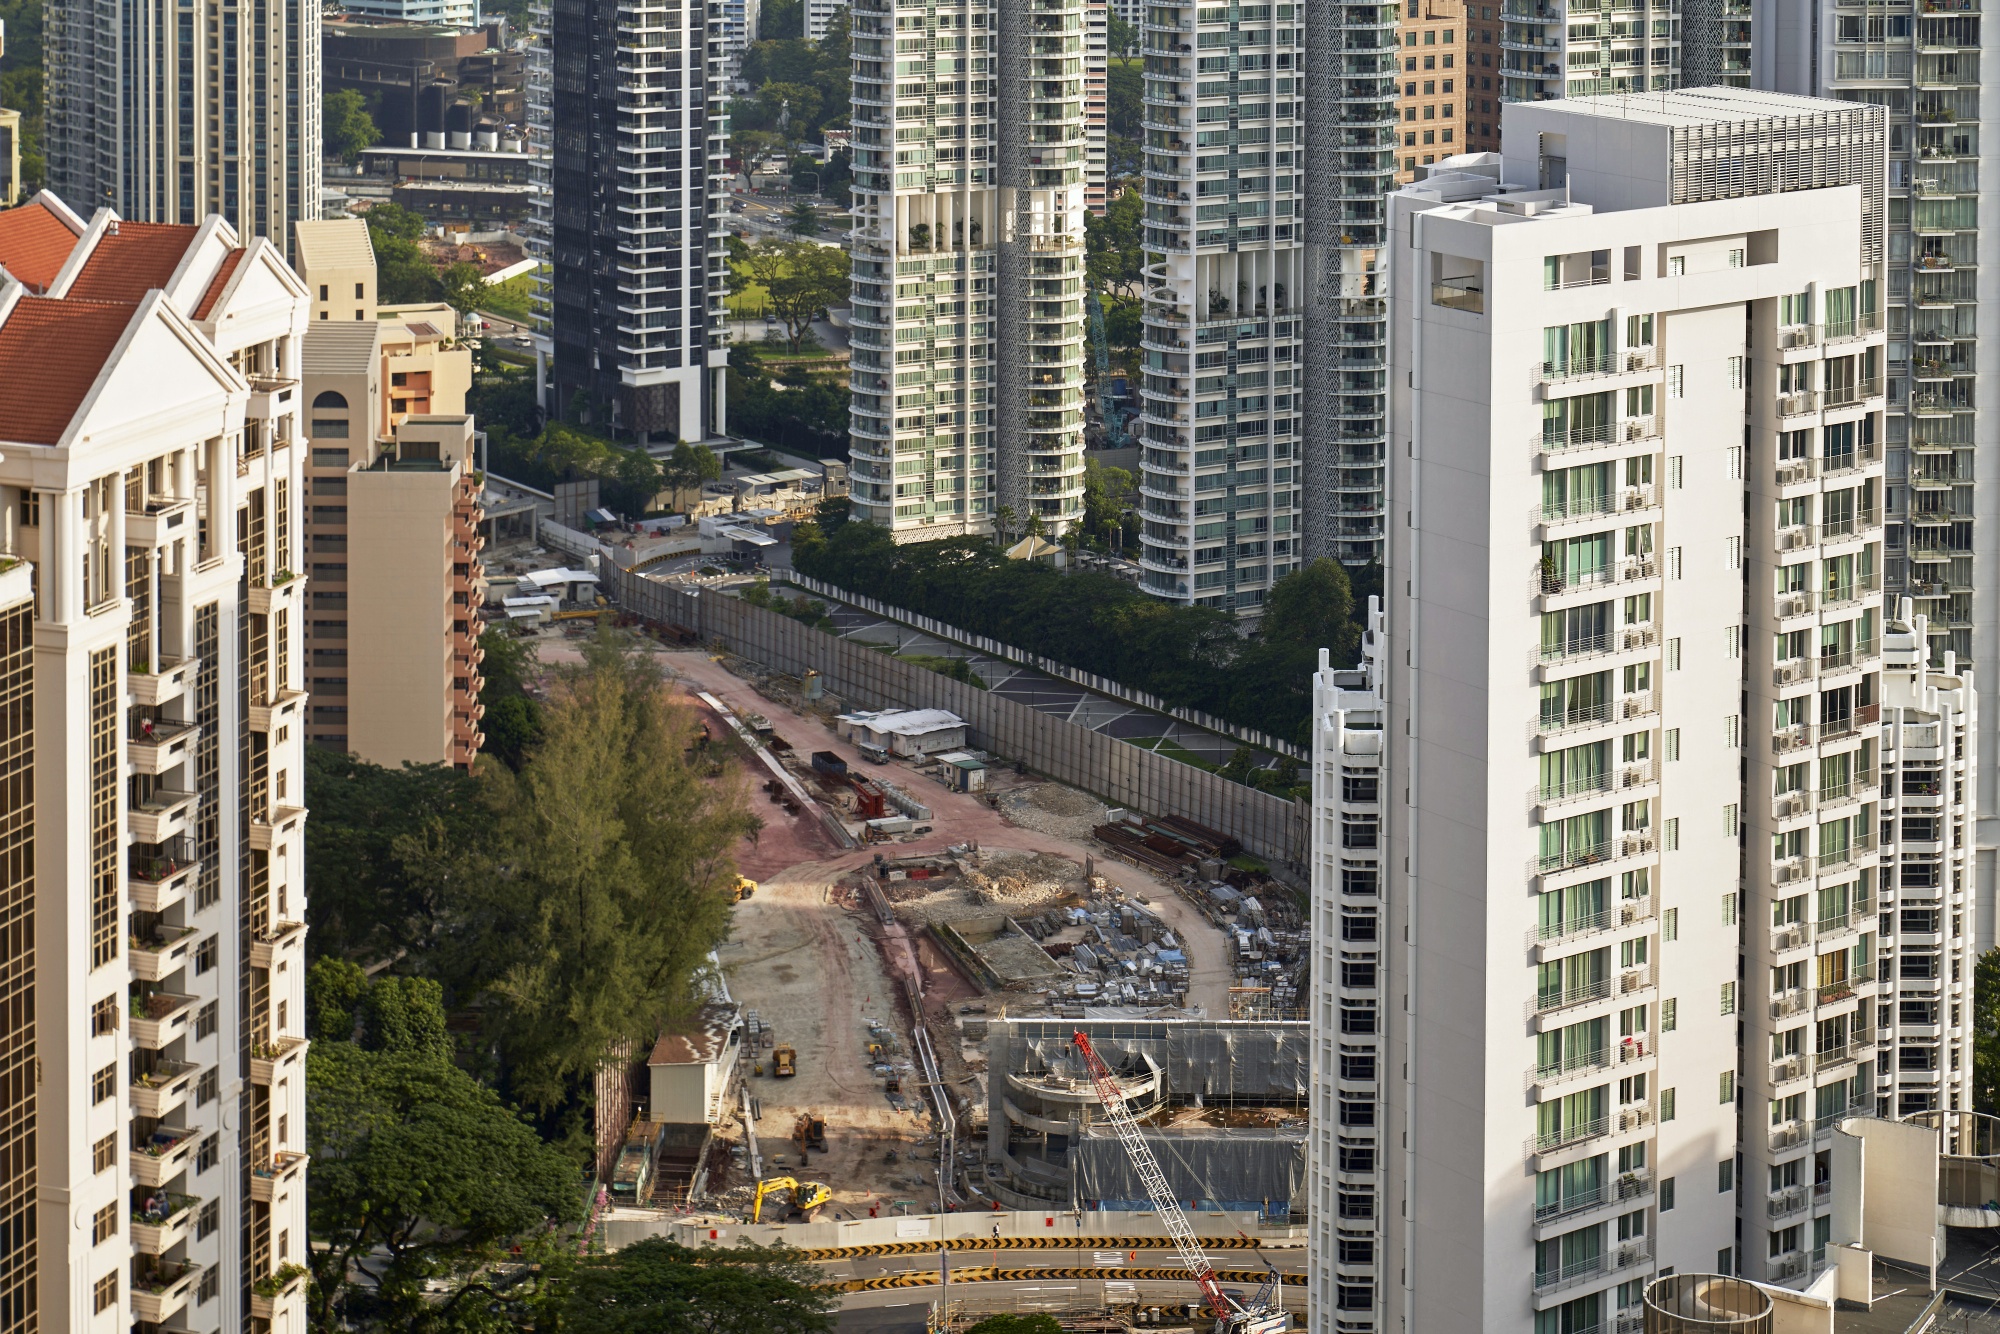 A construction site, part of the Mass Rapid Transit line expansion in Singapore.